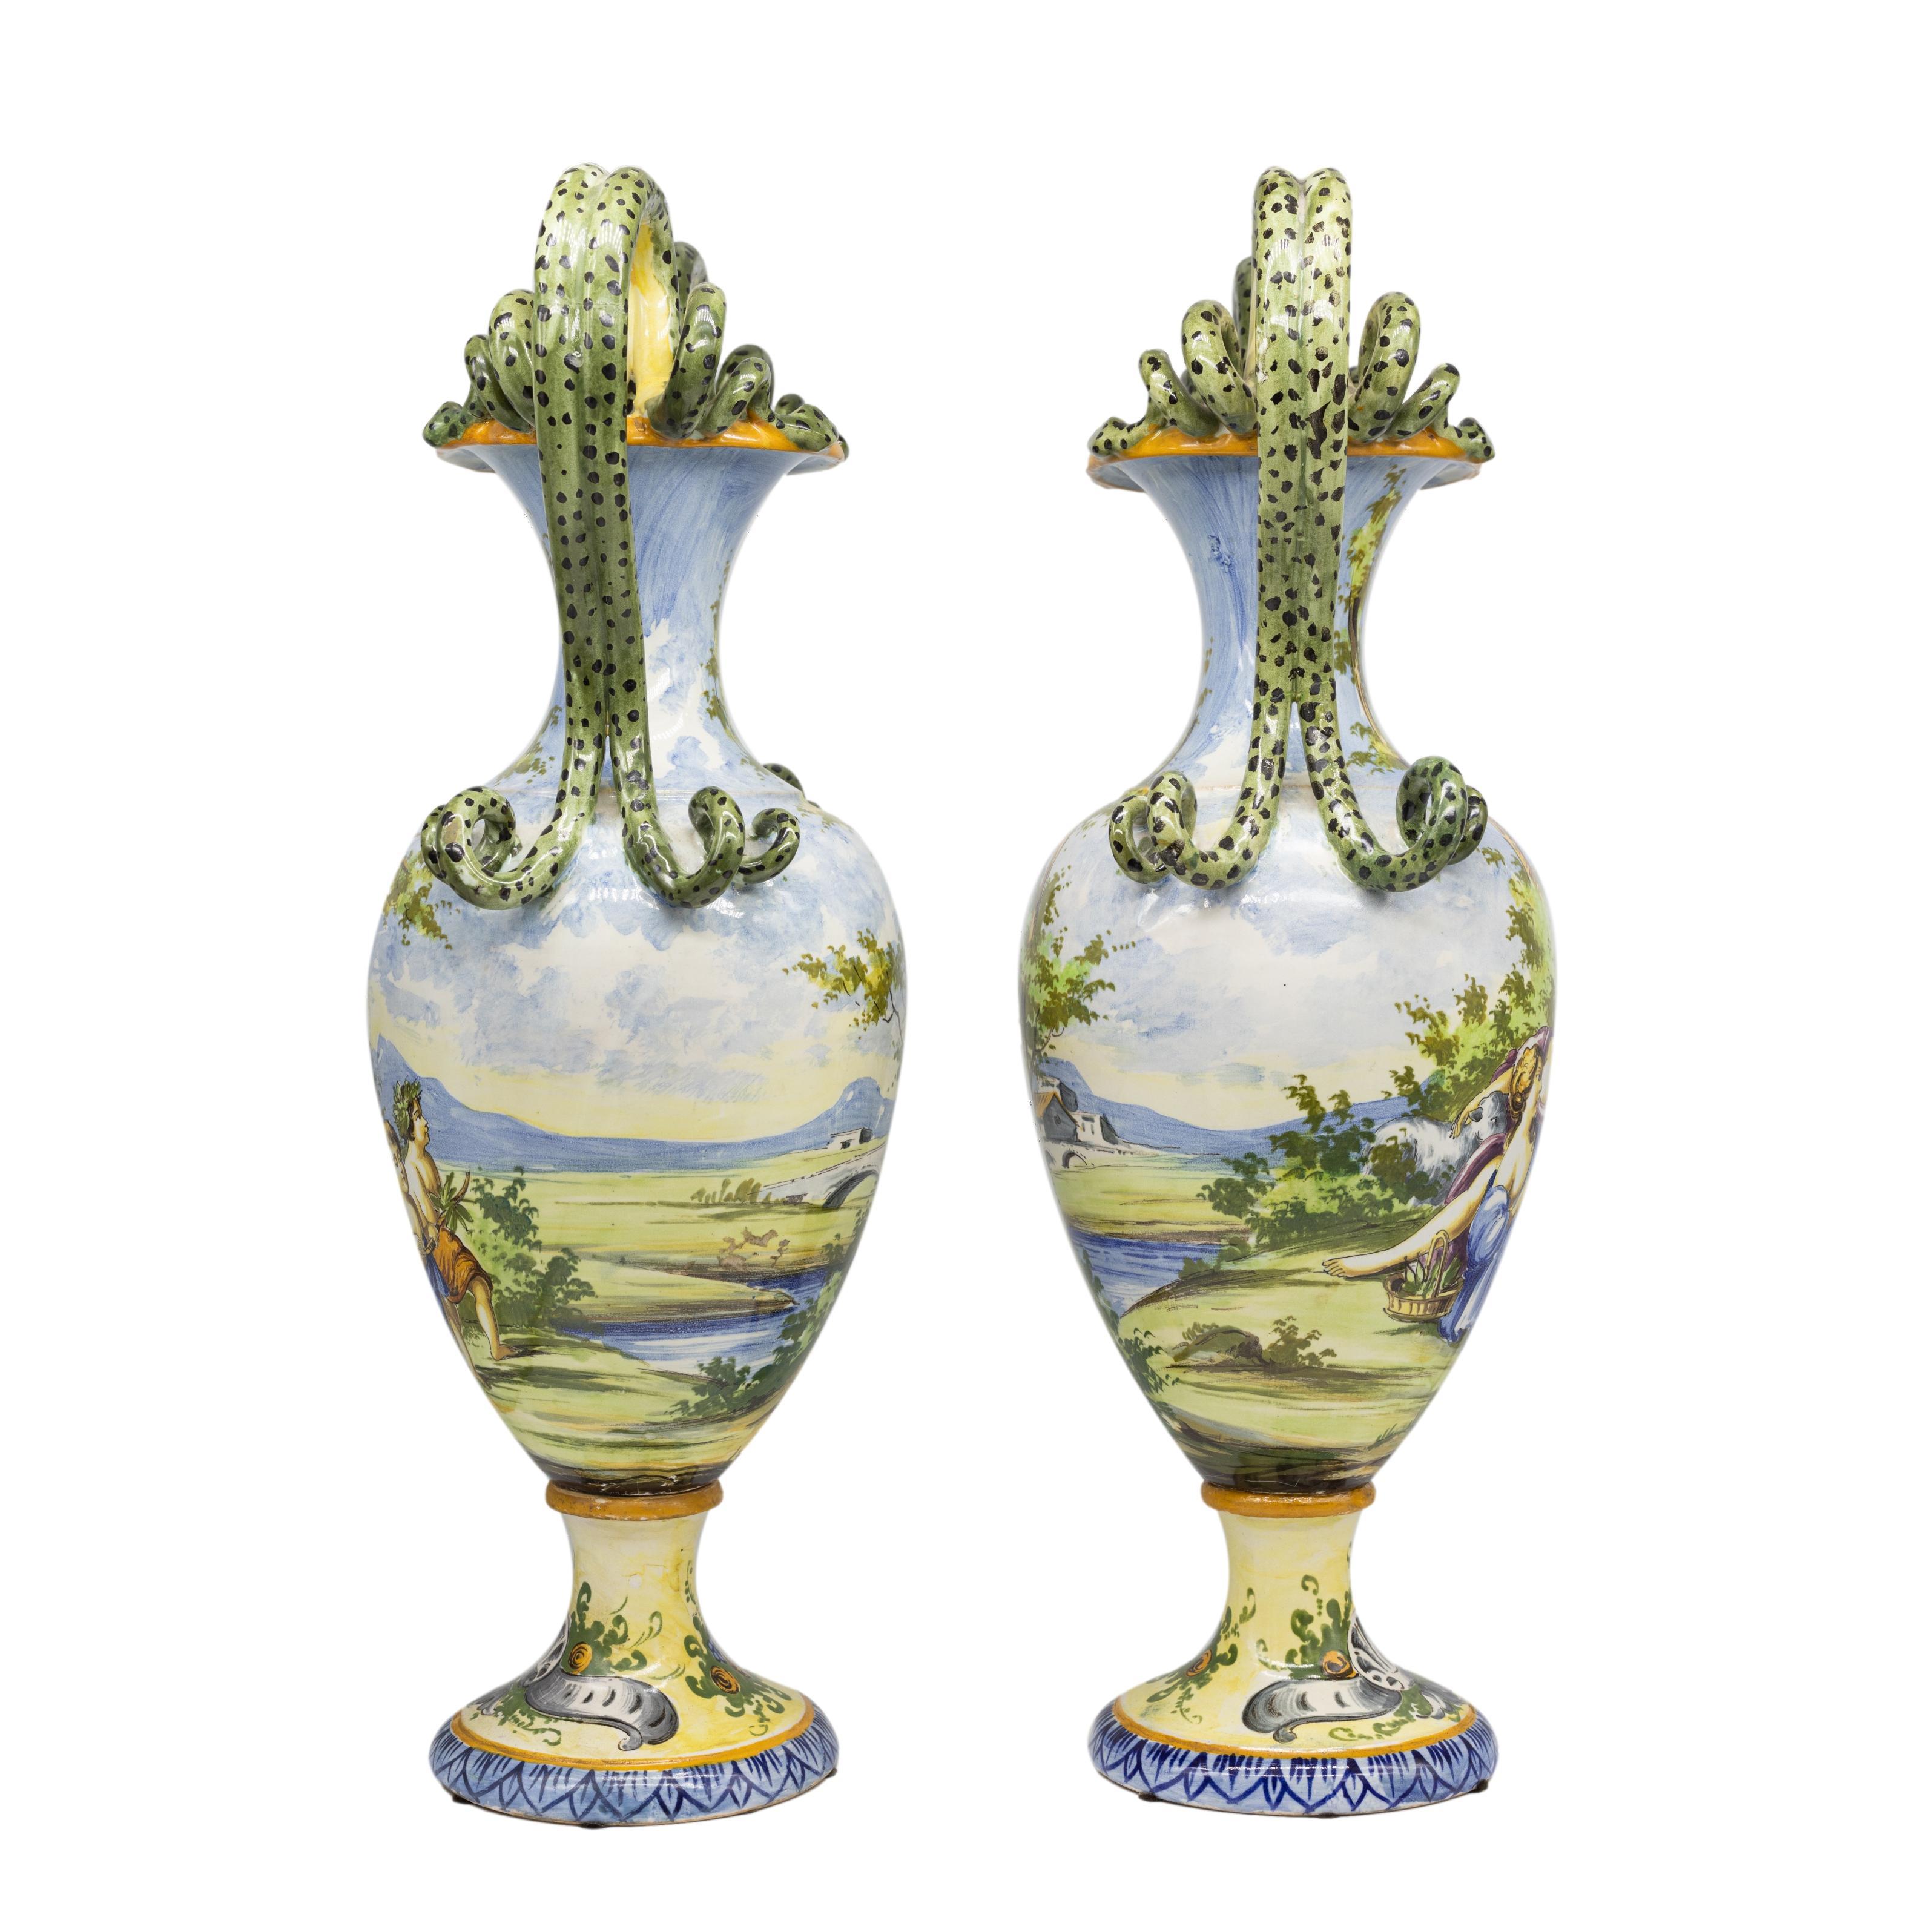 Molded Pair of Italian Maiolica Vases, Coiled Snake Handles, Ca. 1880 For Sale